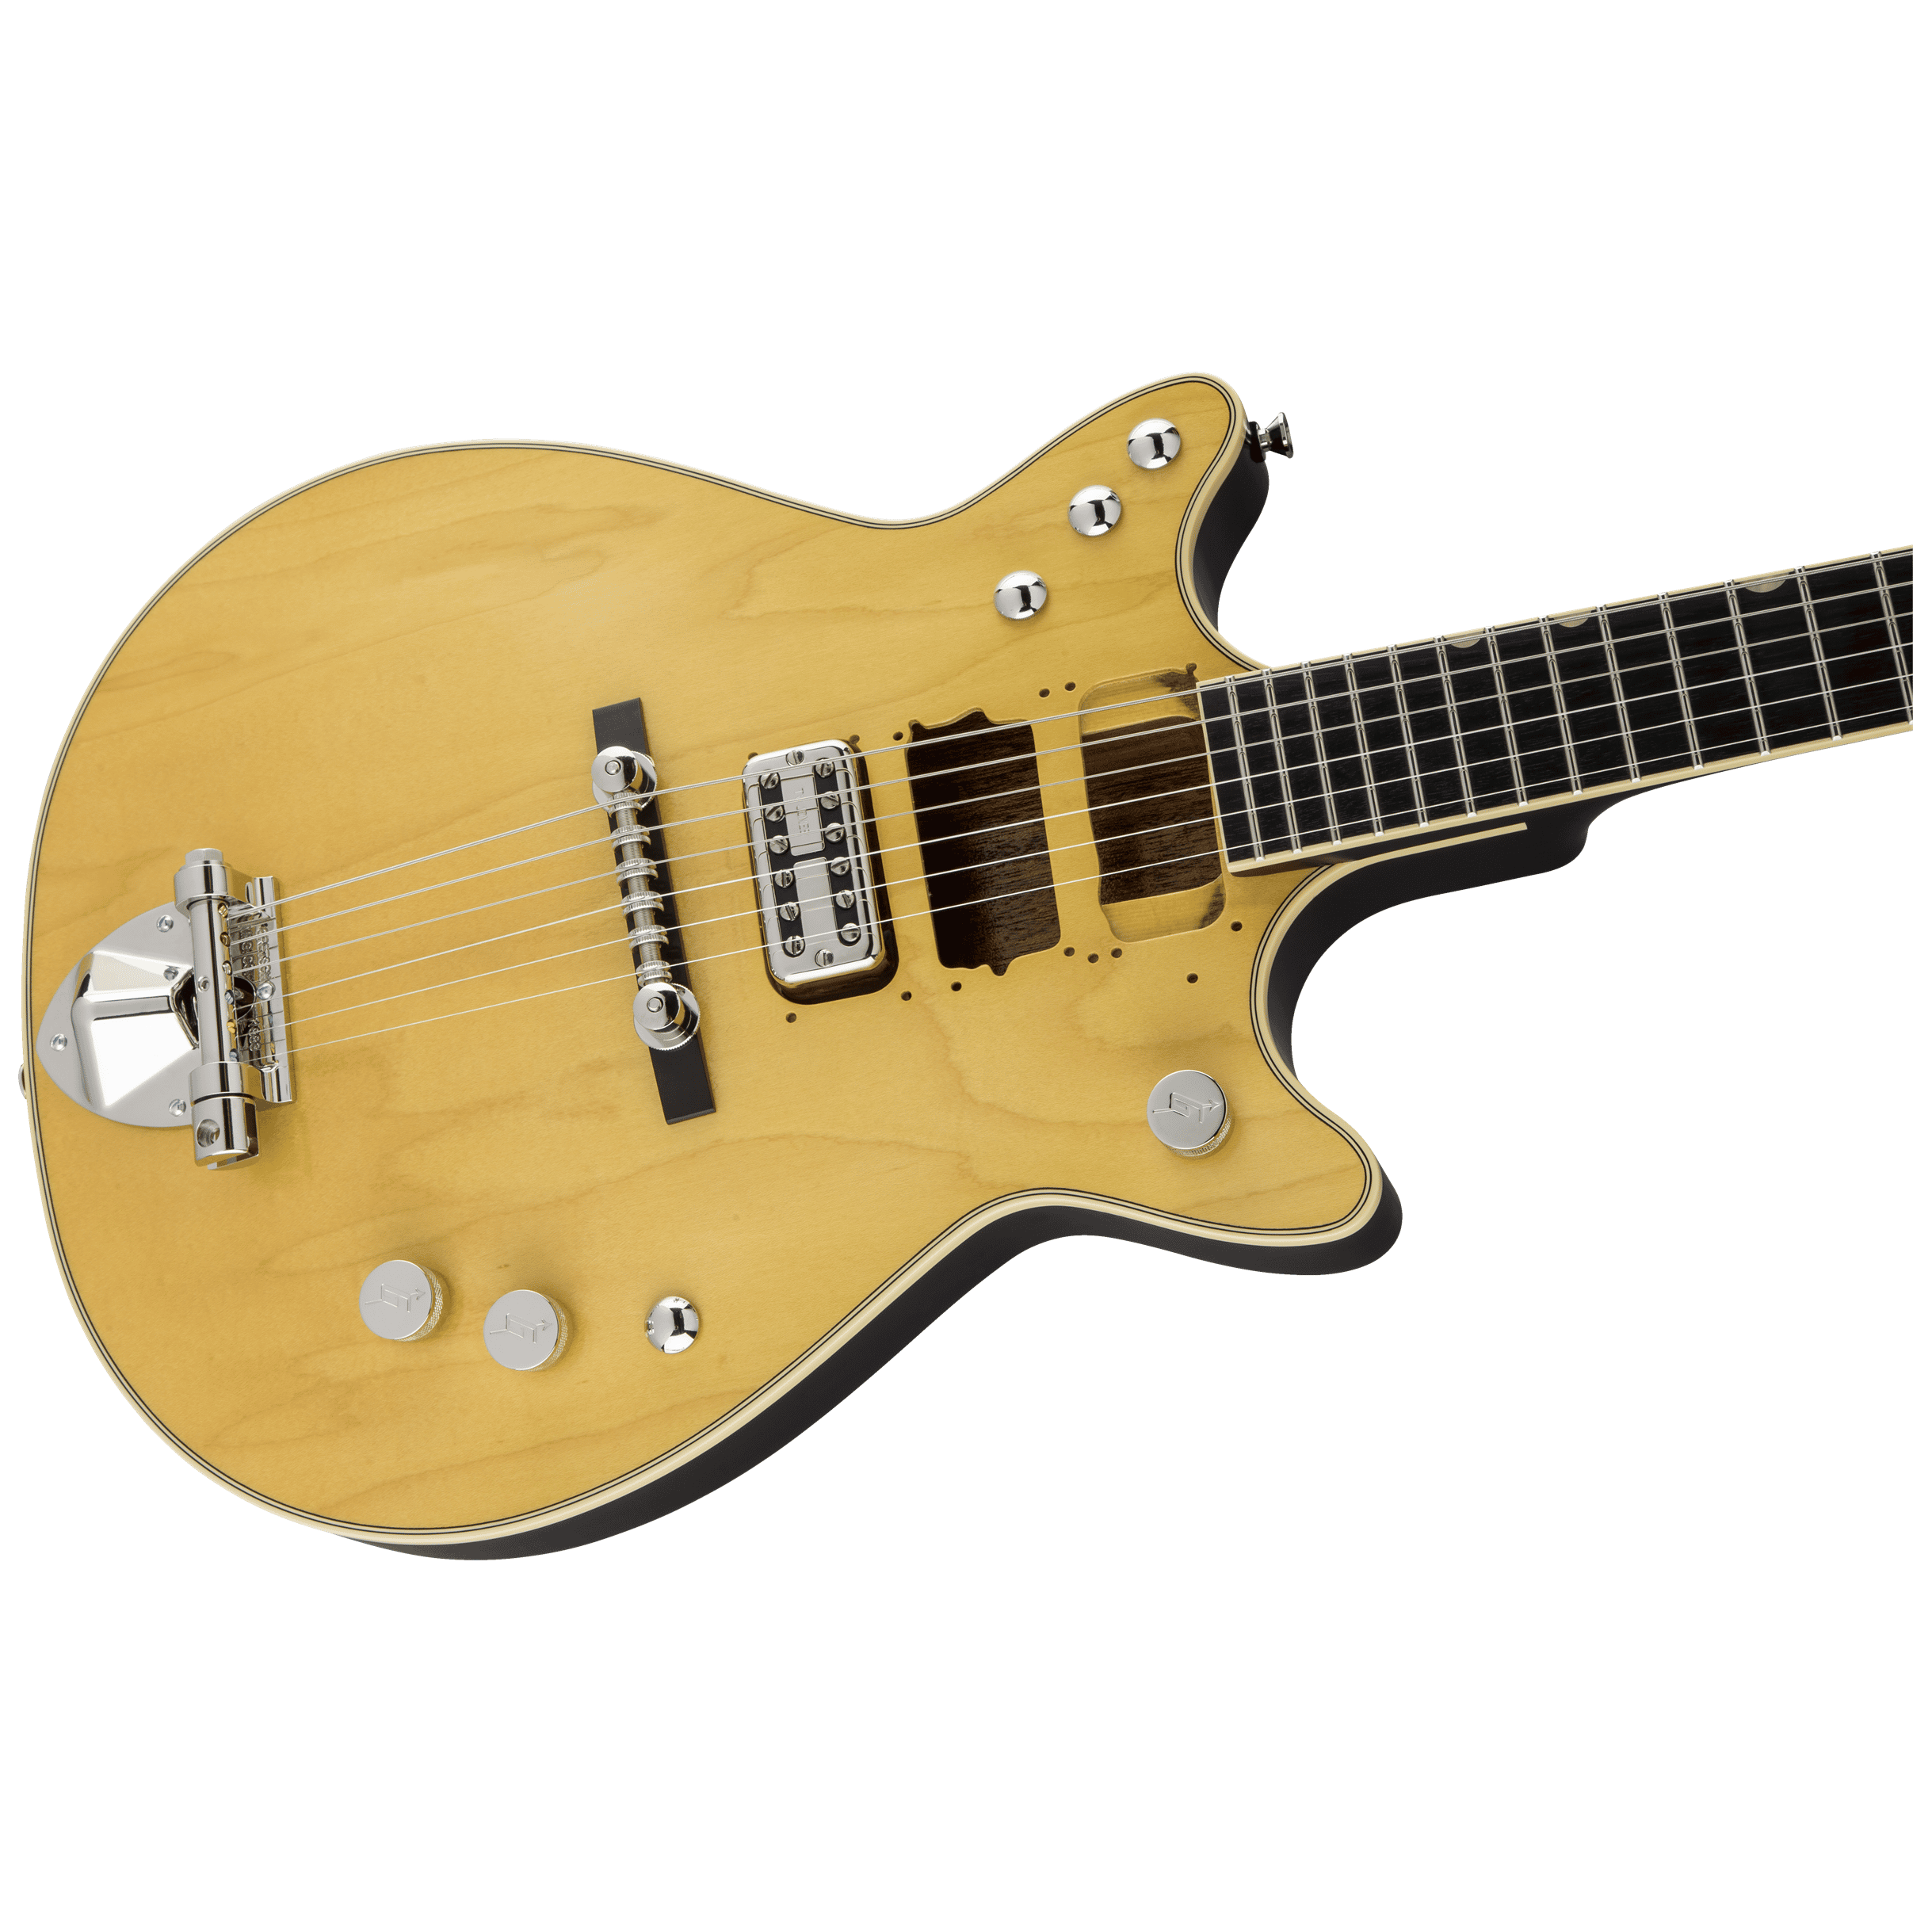 Gretsch G6131-MY Malcolm Young Signature Jet EB NAT 6